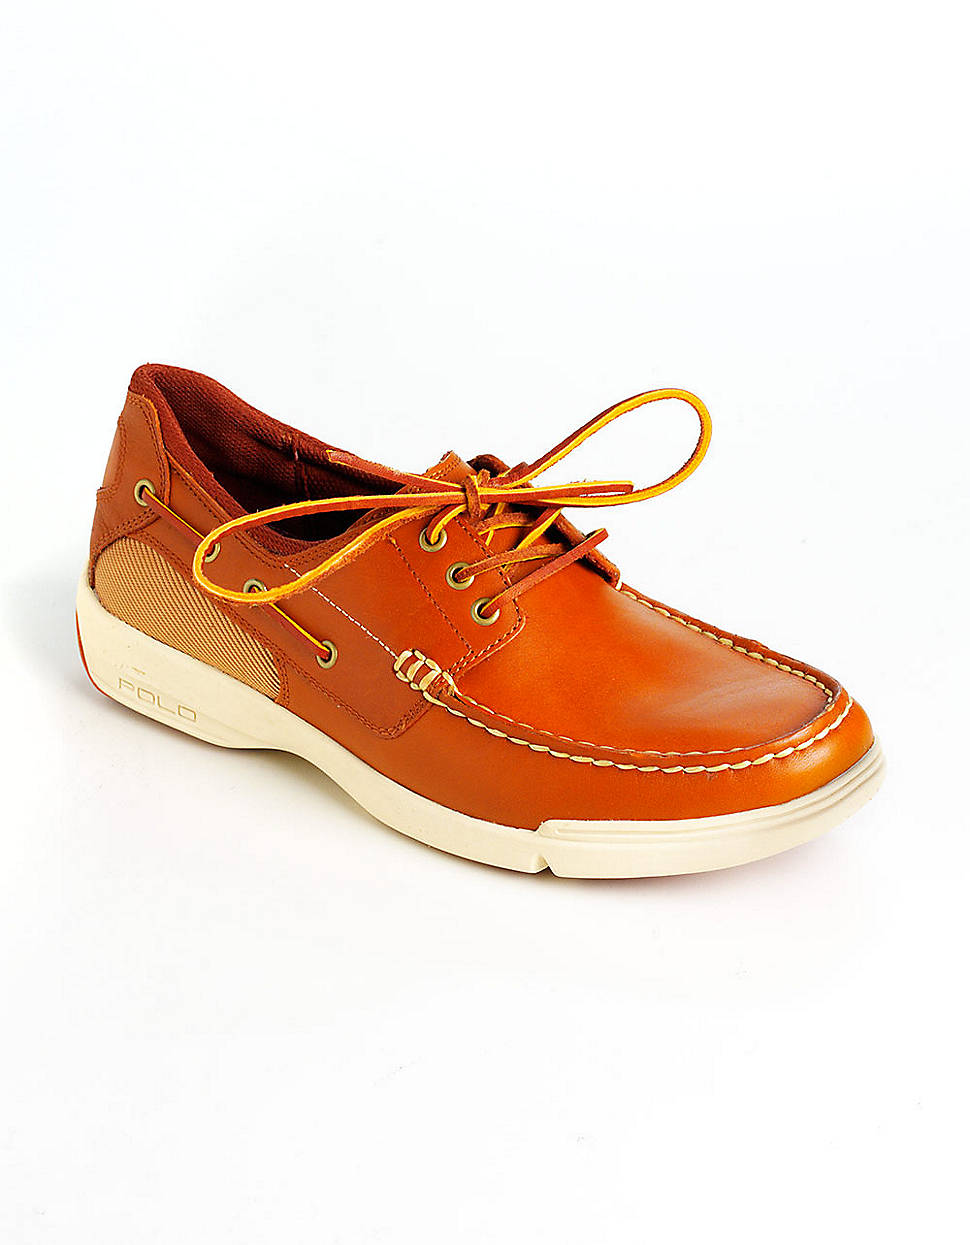 Polo Ralph Lauren Carrick Leather Boat Shoes in Orange for